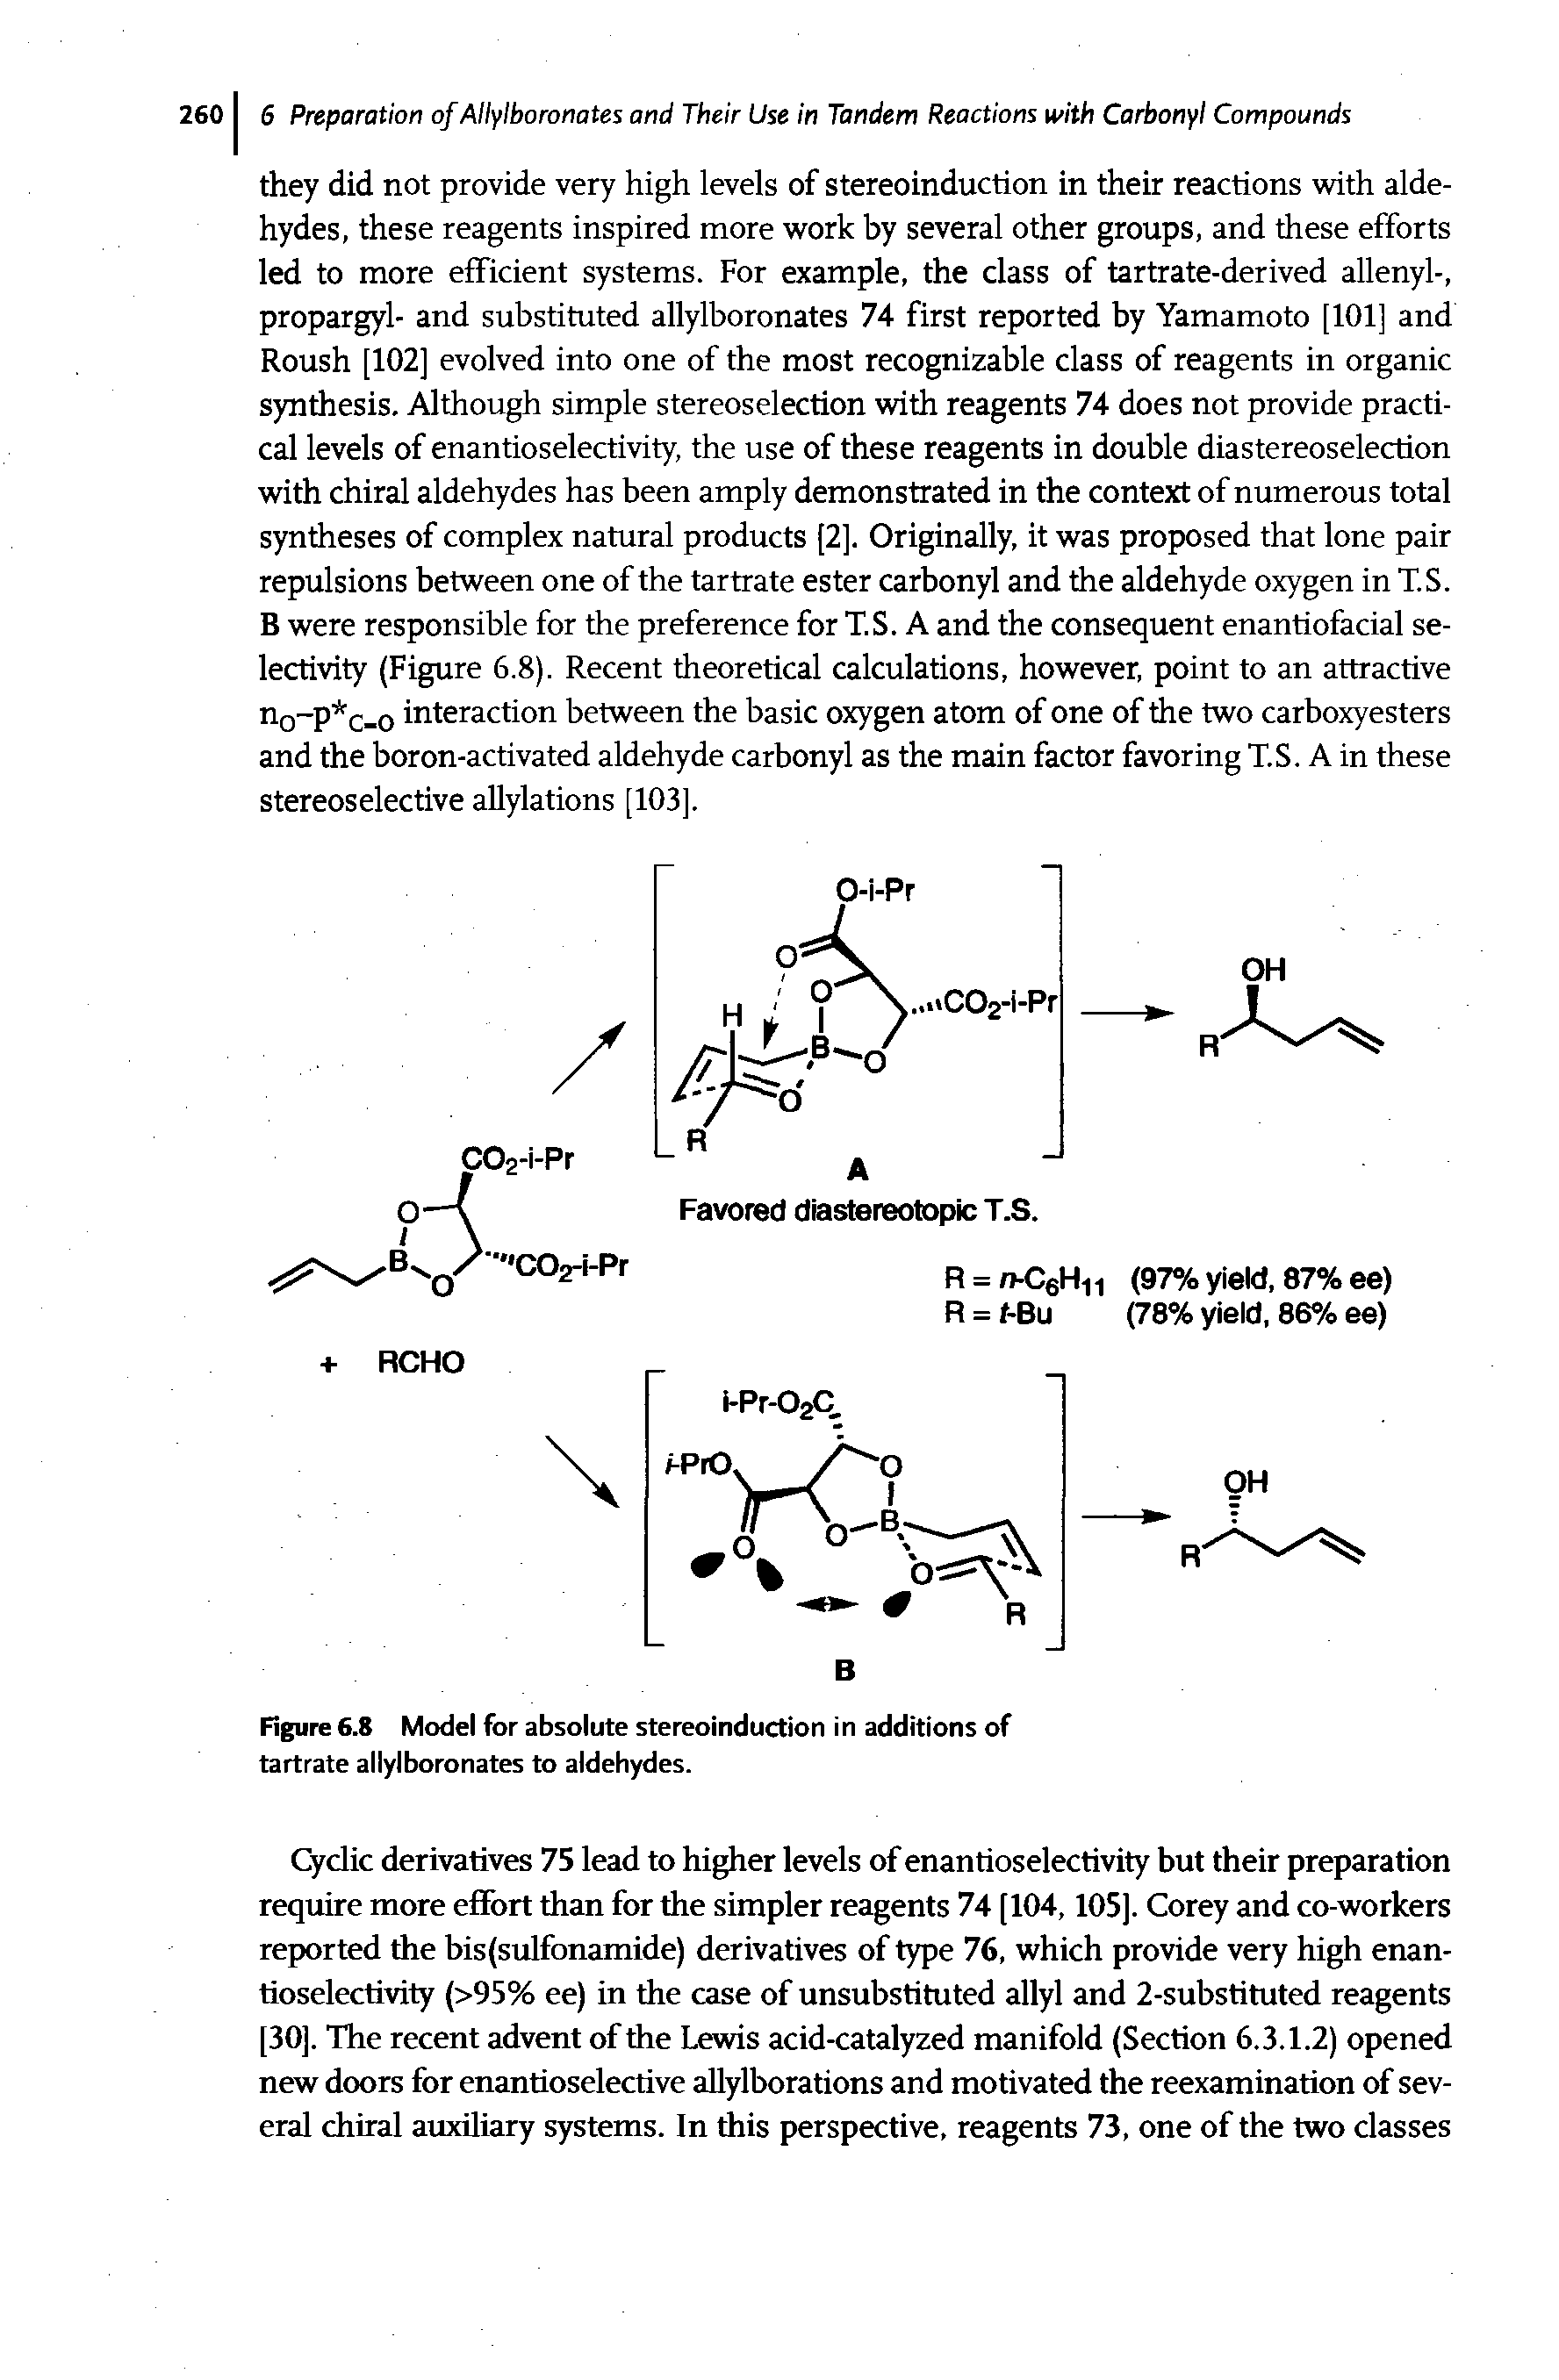 Figure 6Jt Model for absolute stereoinduction in additions of tartrate allylboronates to aldehydes.